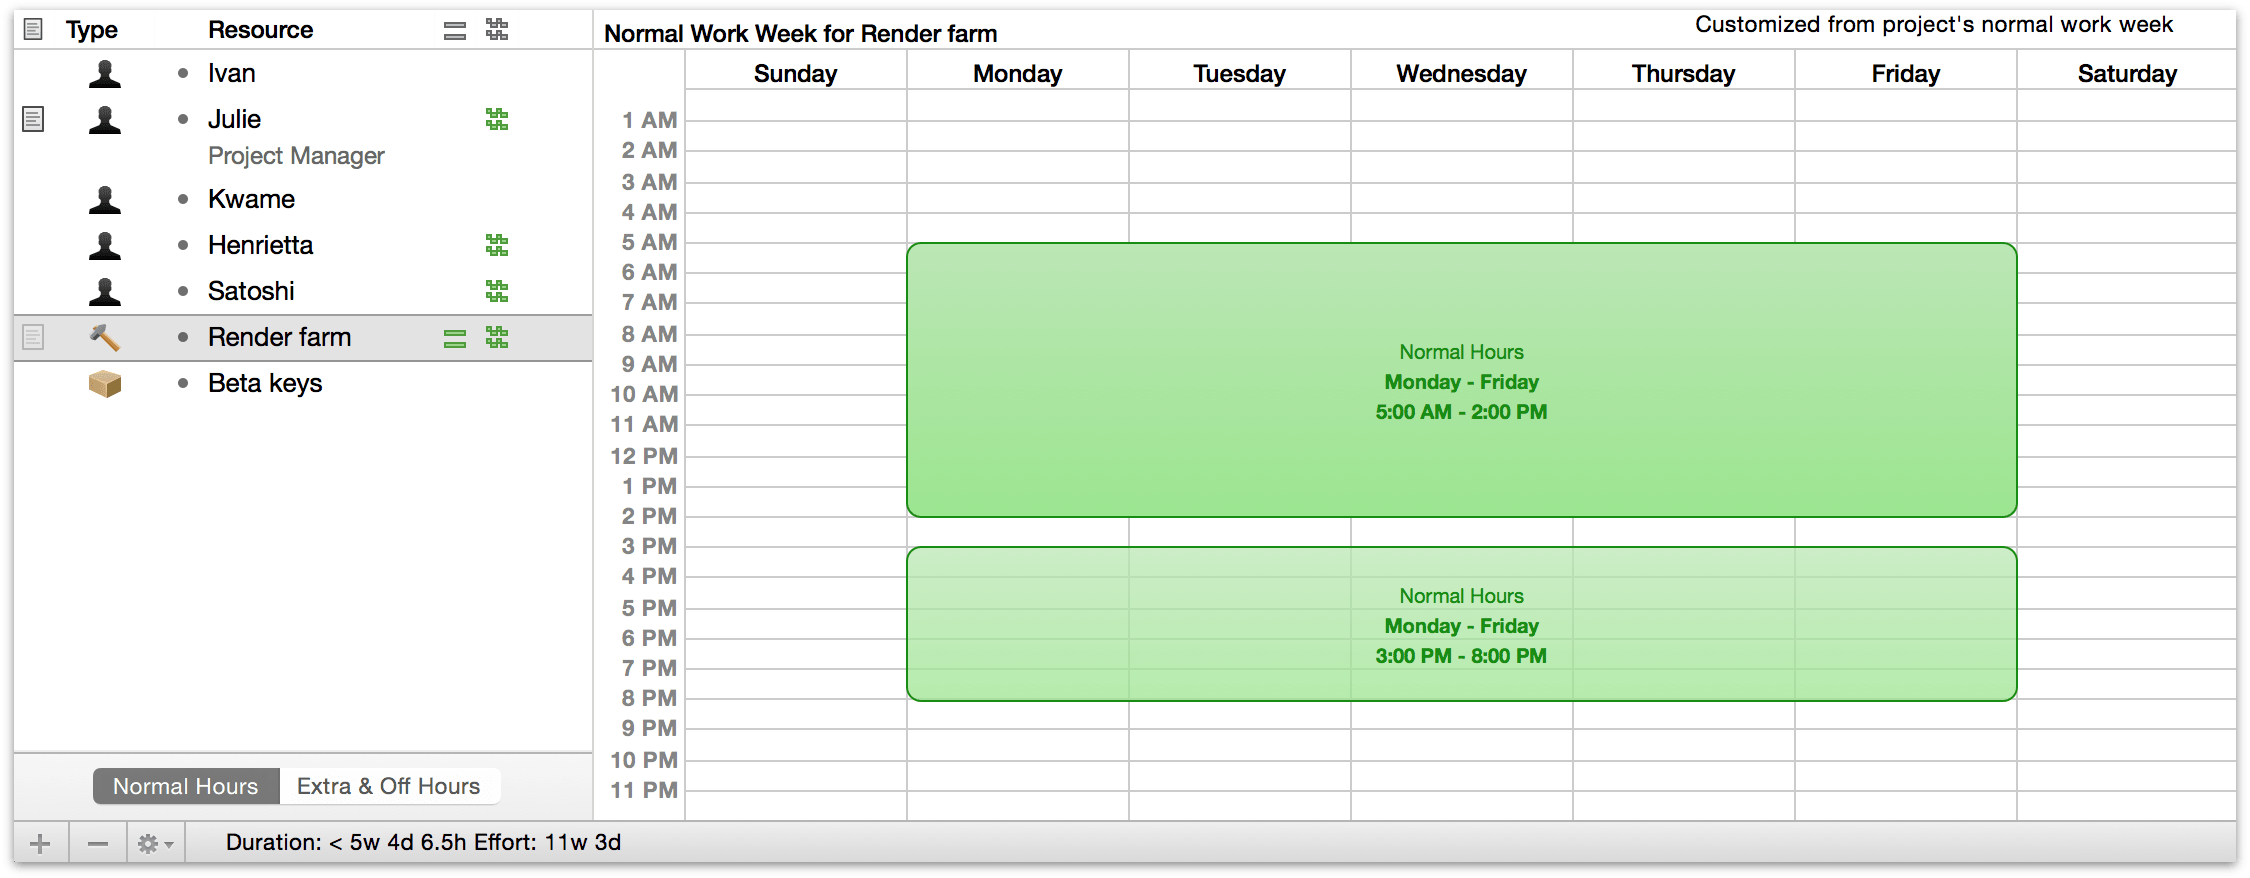 Editing the normal work week for a single resource.